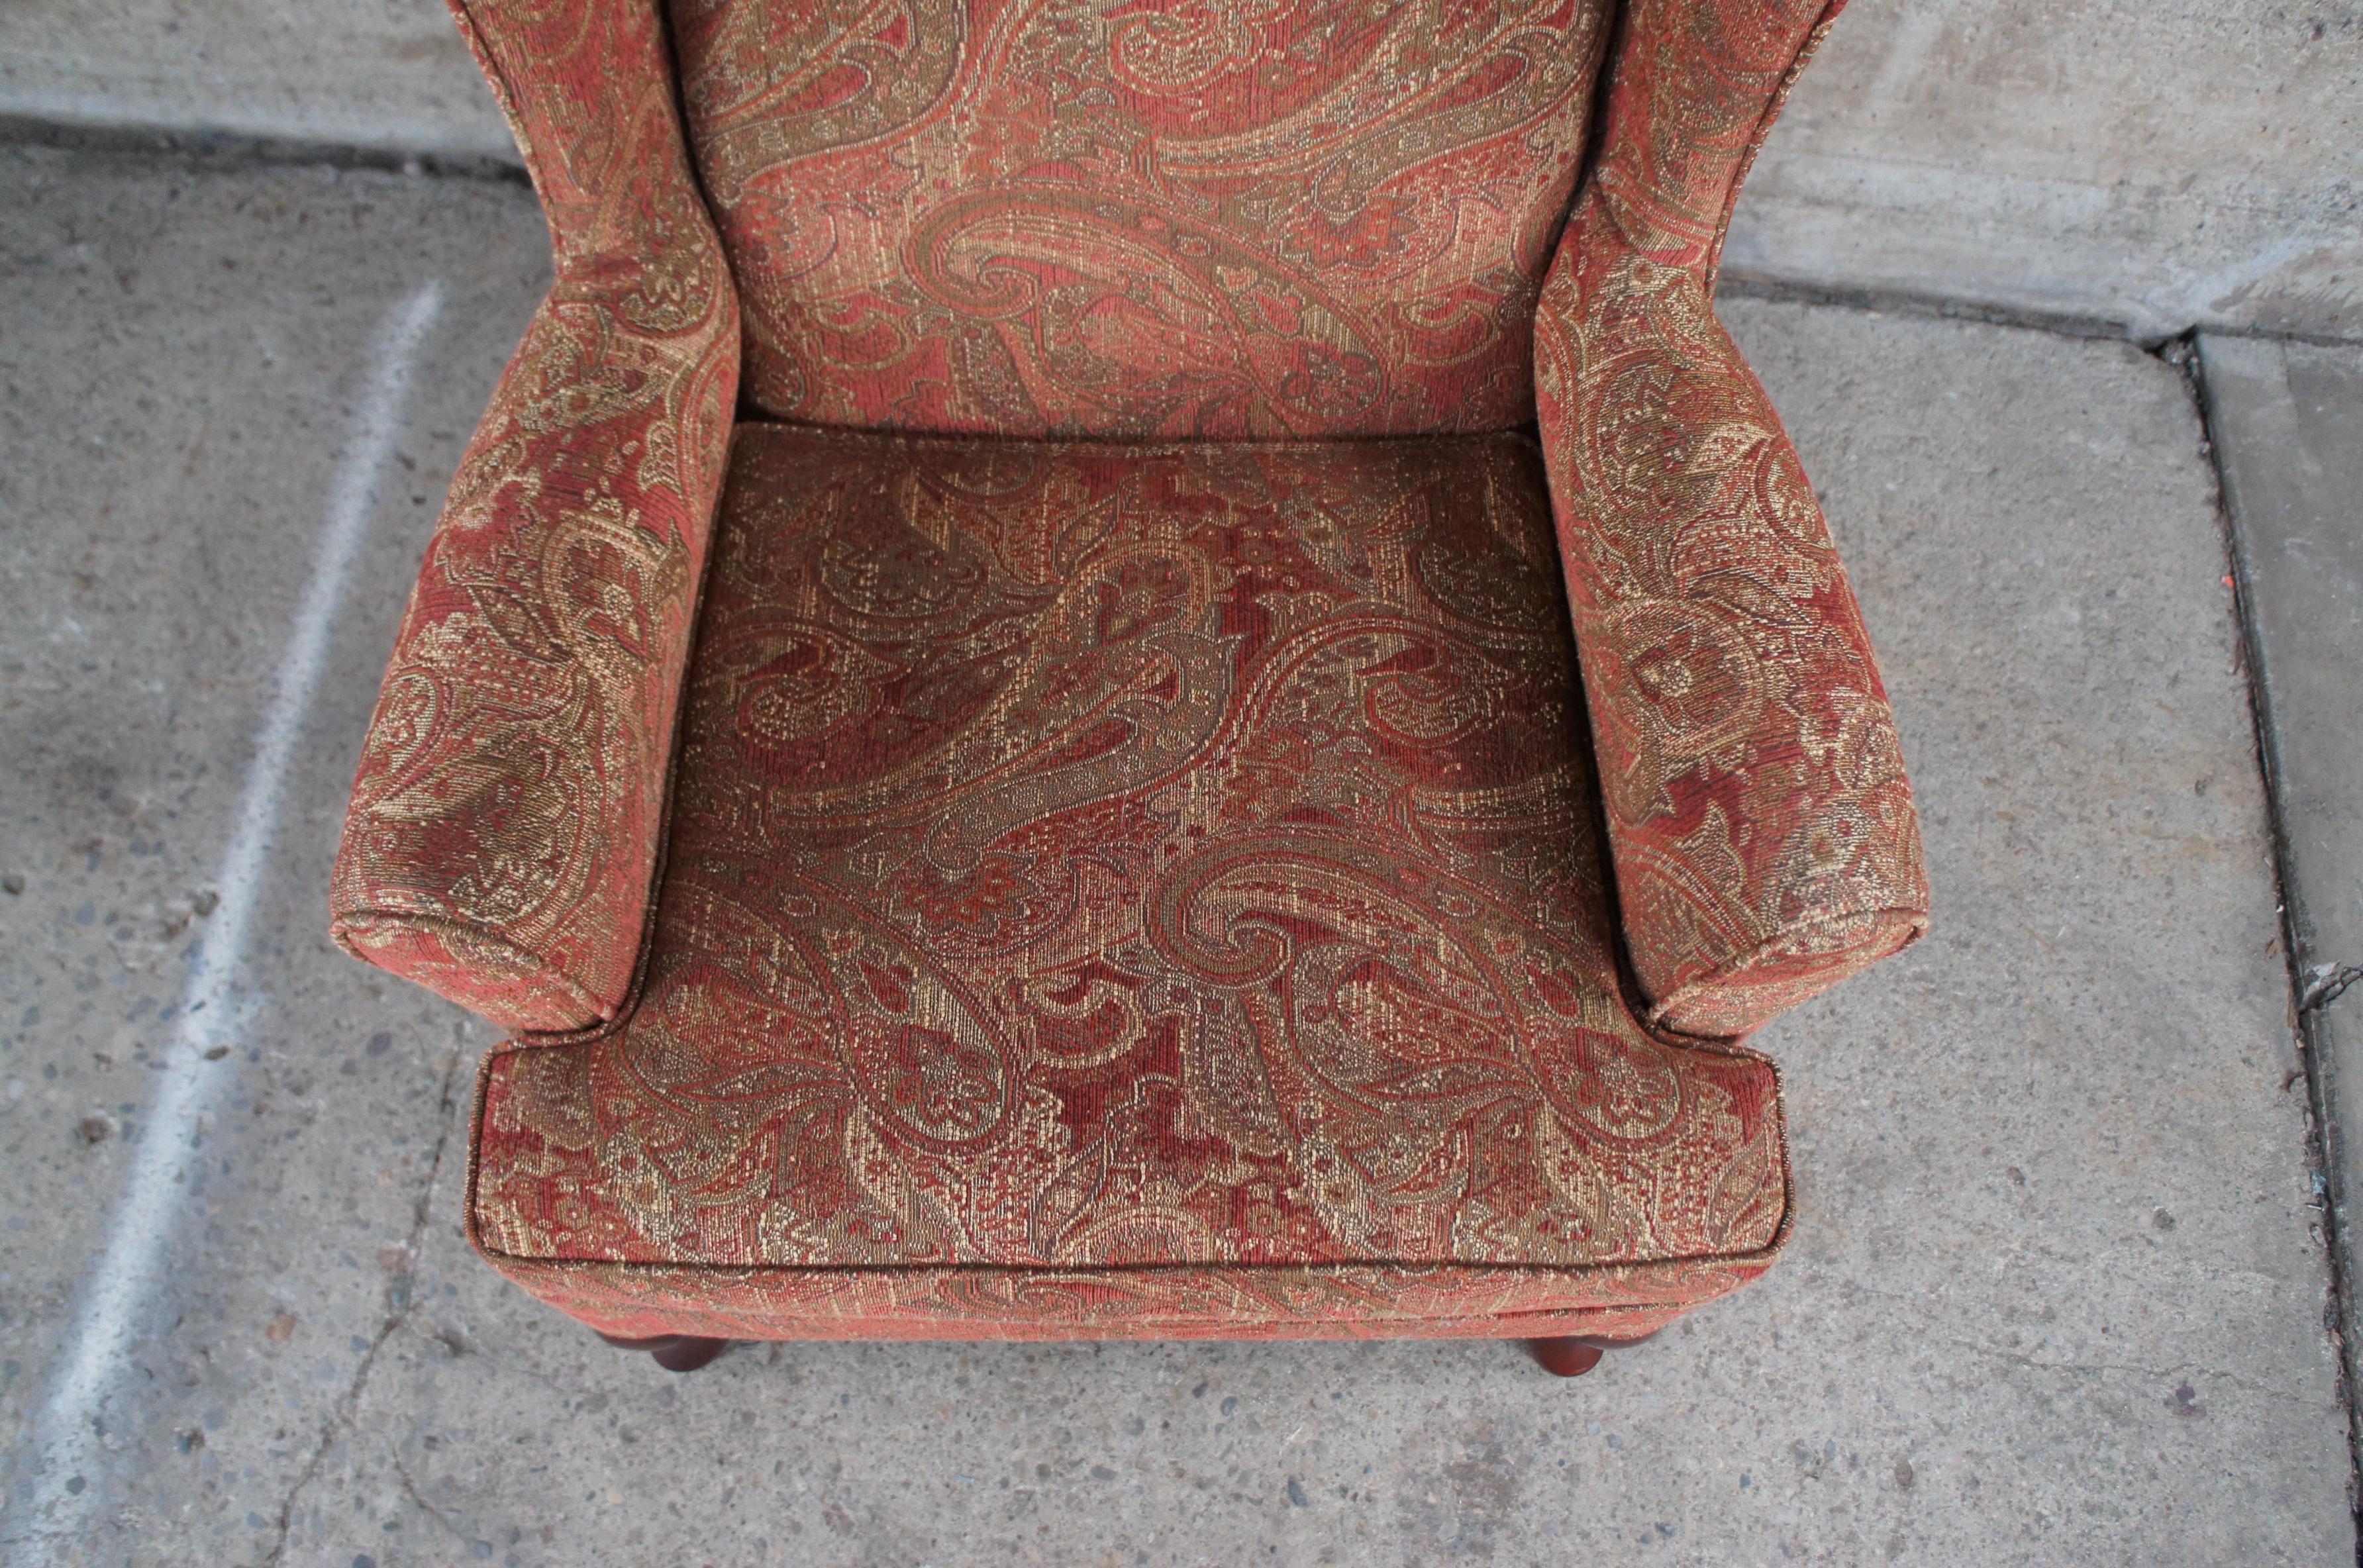 Hardwood 2 Best Home Furnishings Queen Anne Style Wingback Arm Chairs Paisley Fabric Pair